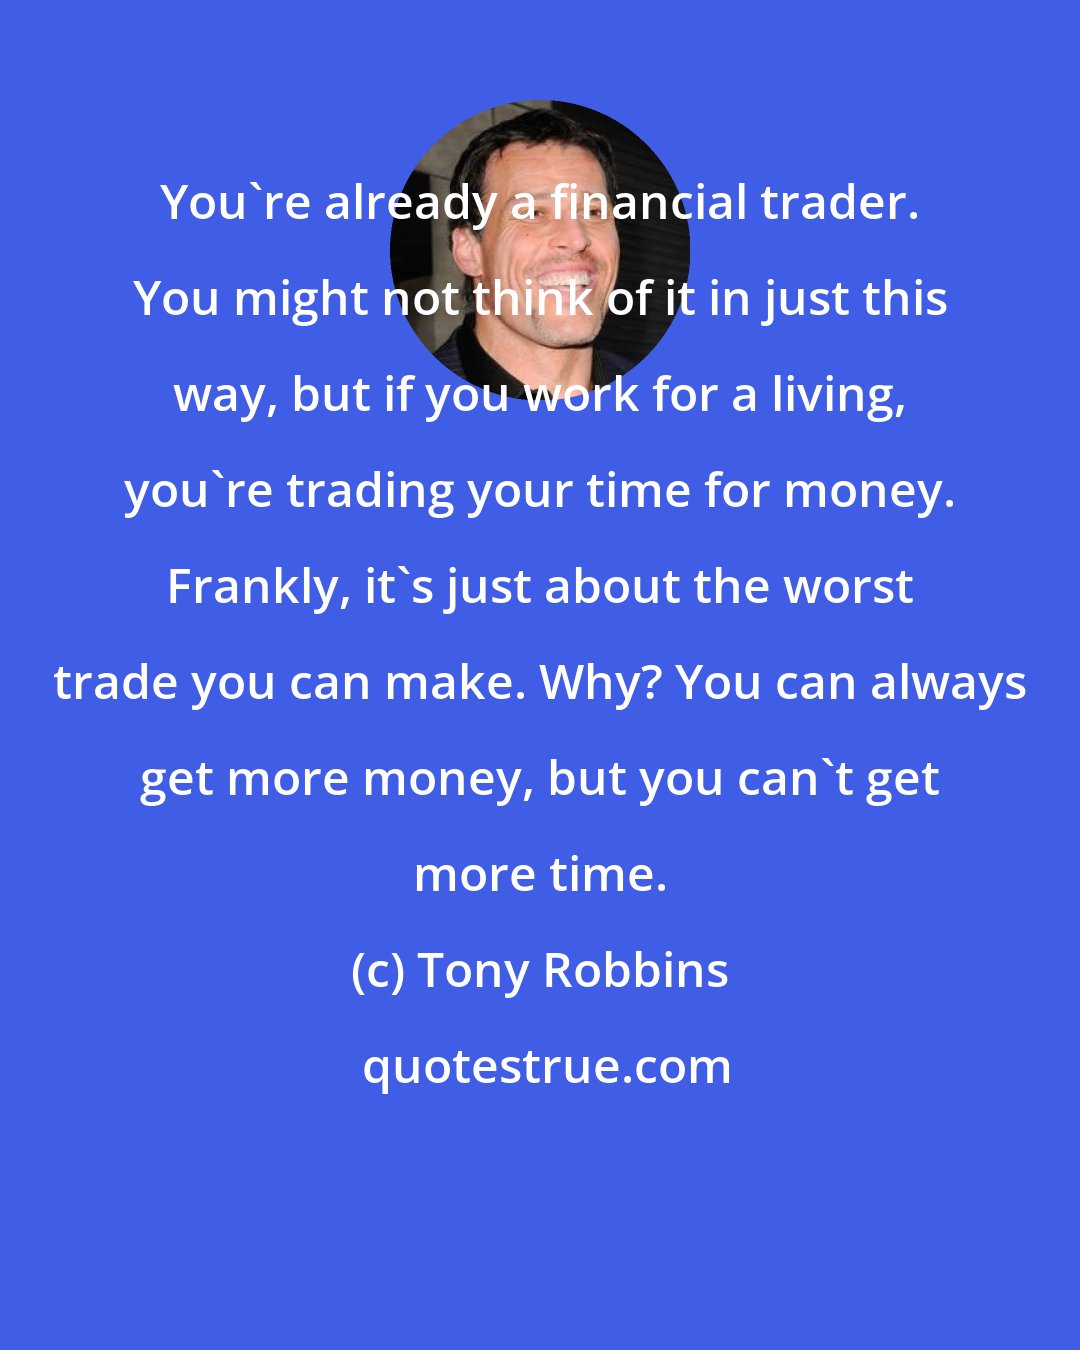 Tony Robbins: You're already a financial trader. You might not think of it in just this way, but if you work for a living, you're trading your time for money. Frankly, it's just about the worst trade you can make. Why? You can always get more money, but you can't get more time.